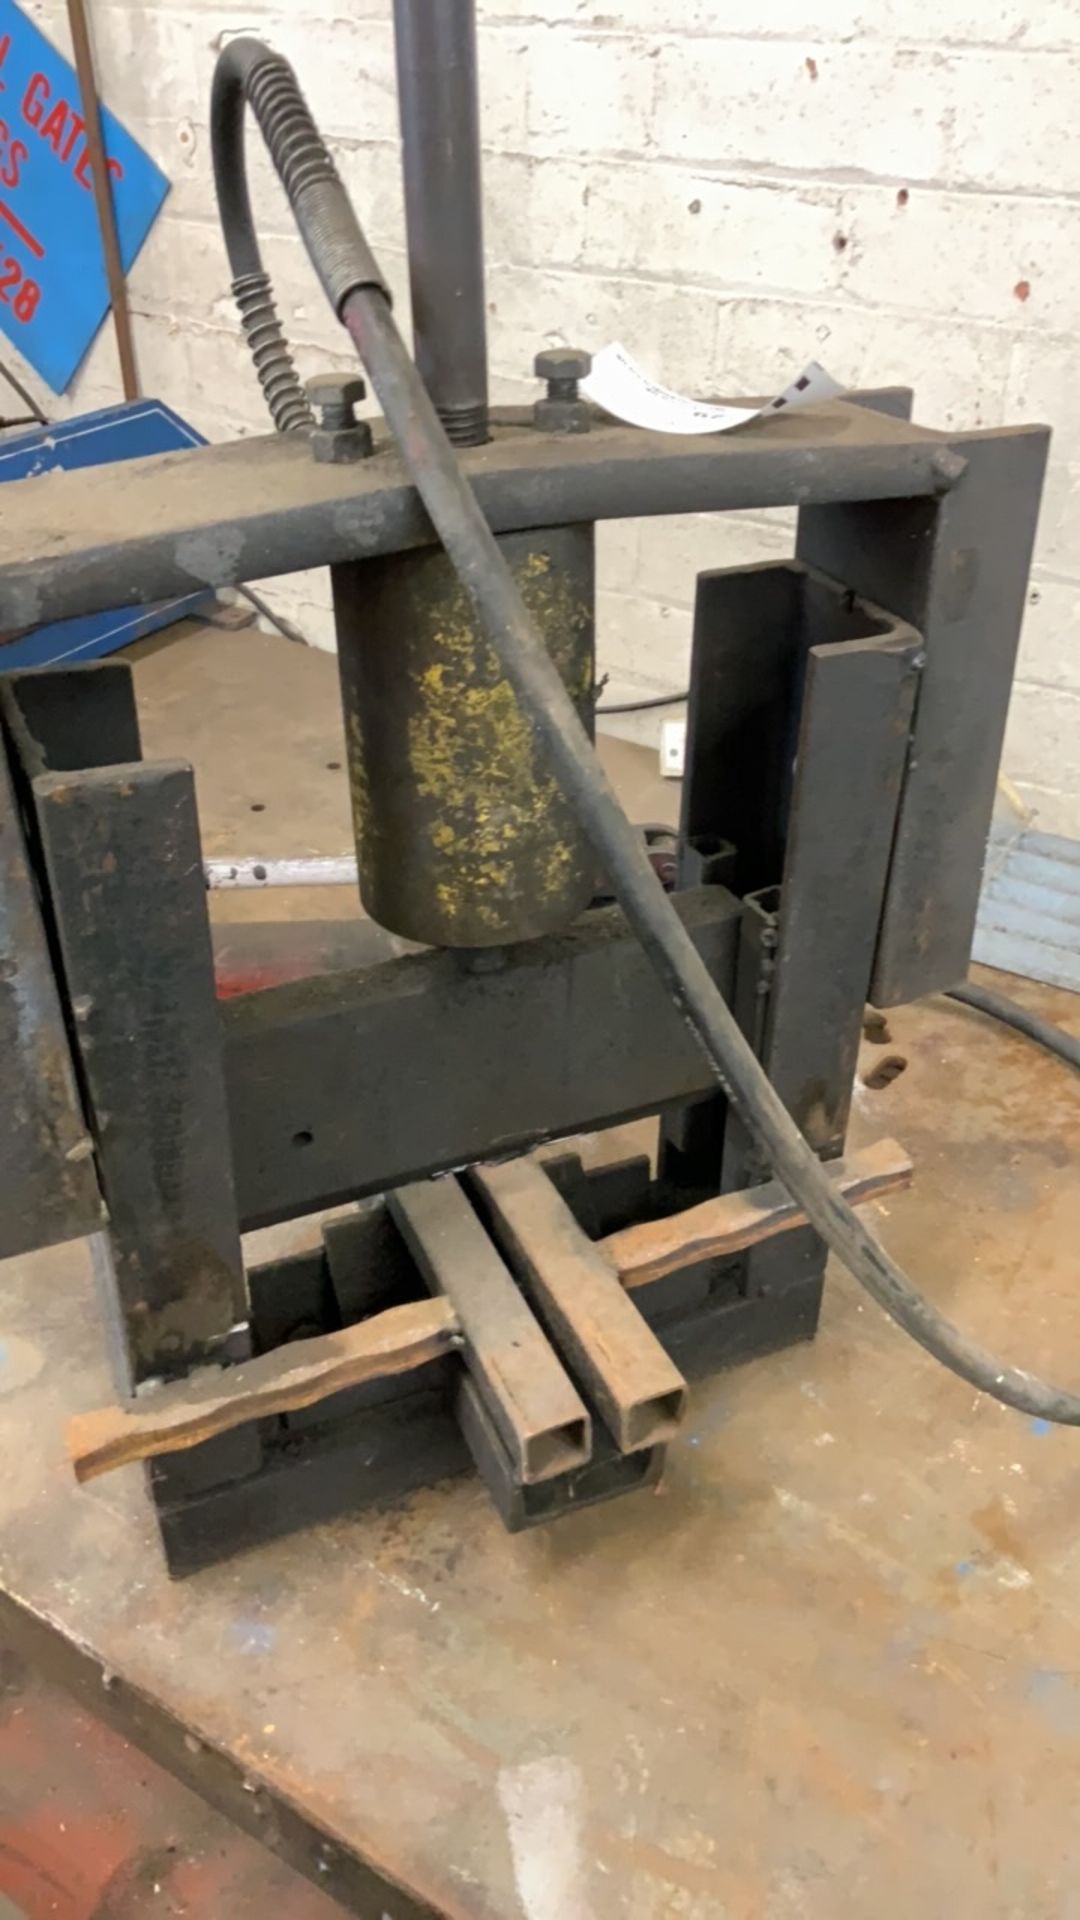 Fabricated Hand Operated Hydraulic Press - Image 10 of 10